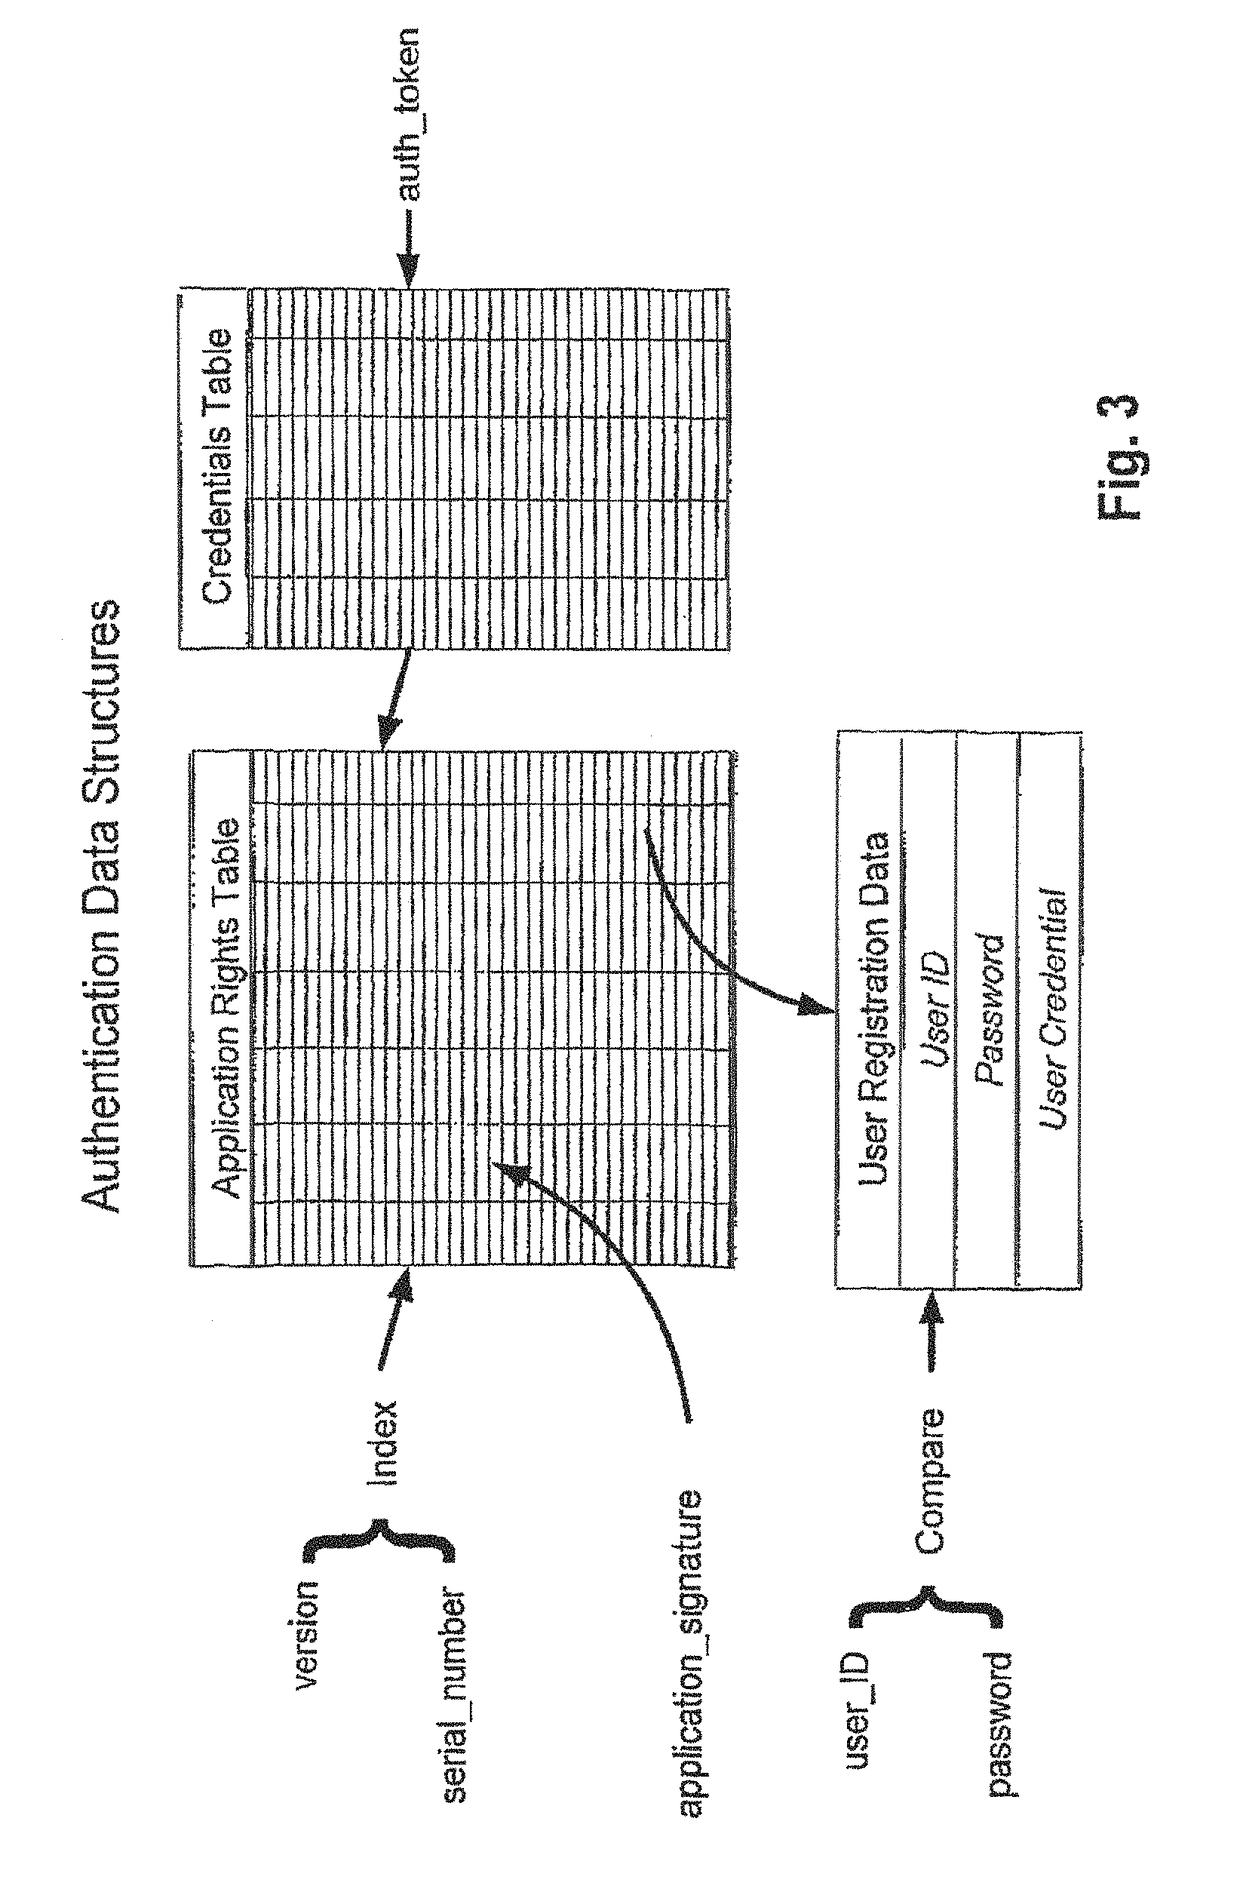 Secure application acceleration system, methods and apparatus